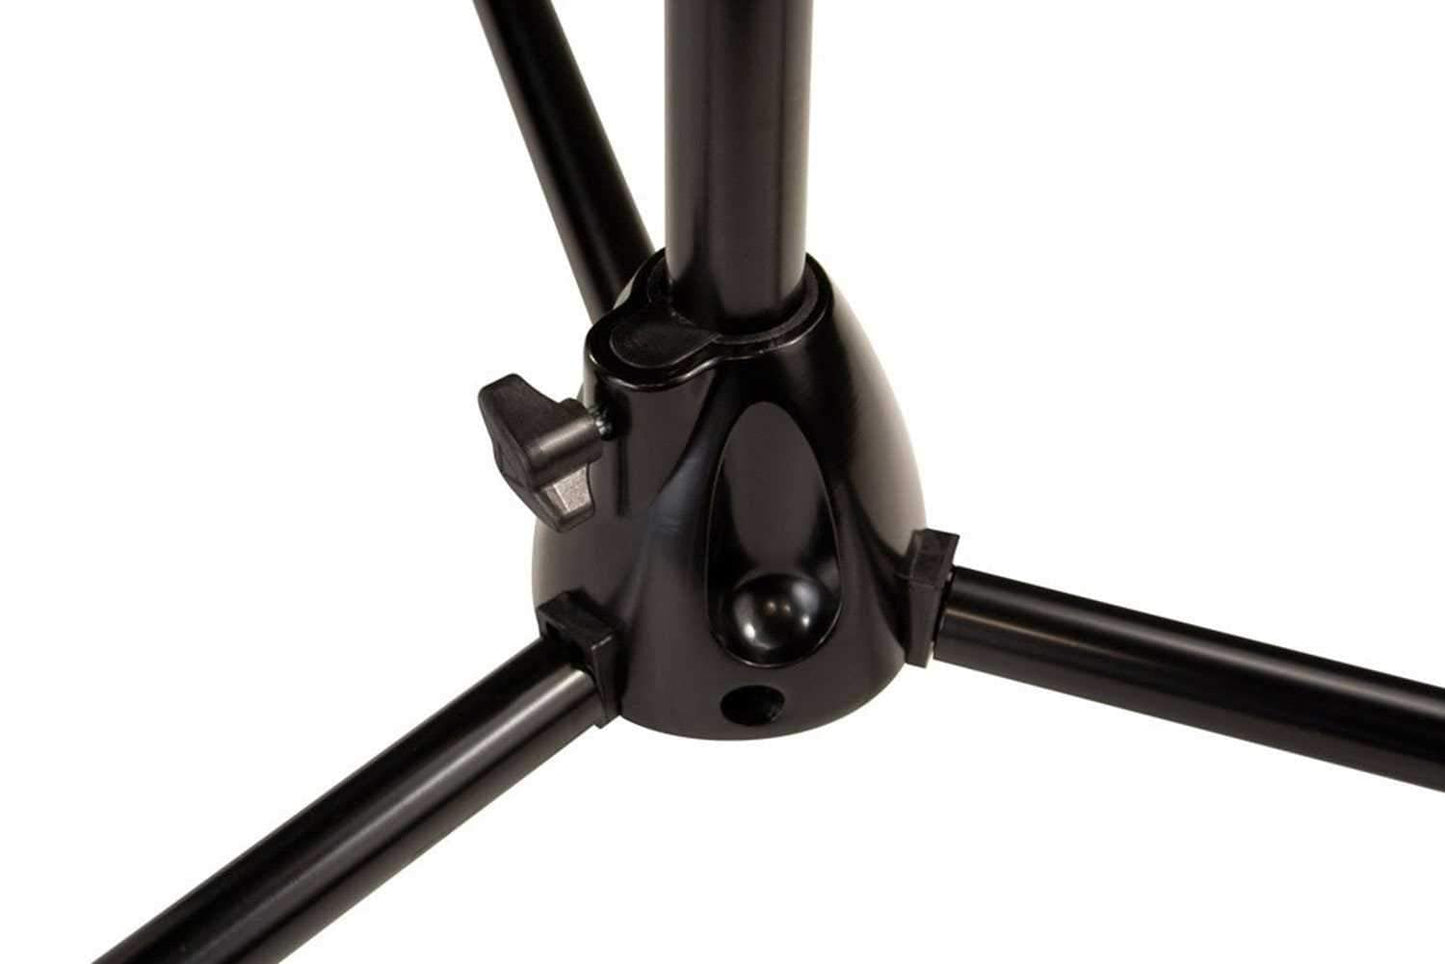 Ultimate PRO-R-T Tripod Base Standard Mic Stand - PSSL ProSound and Stage Lighting